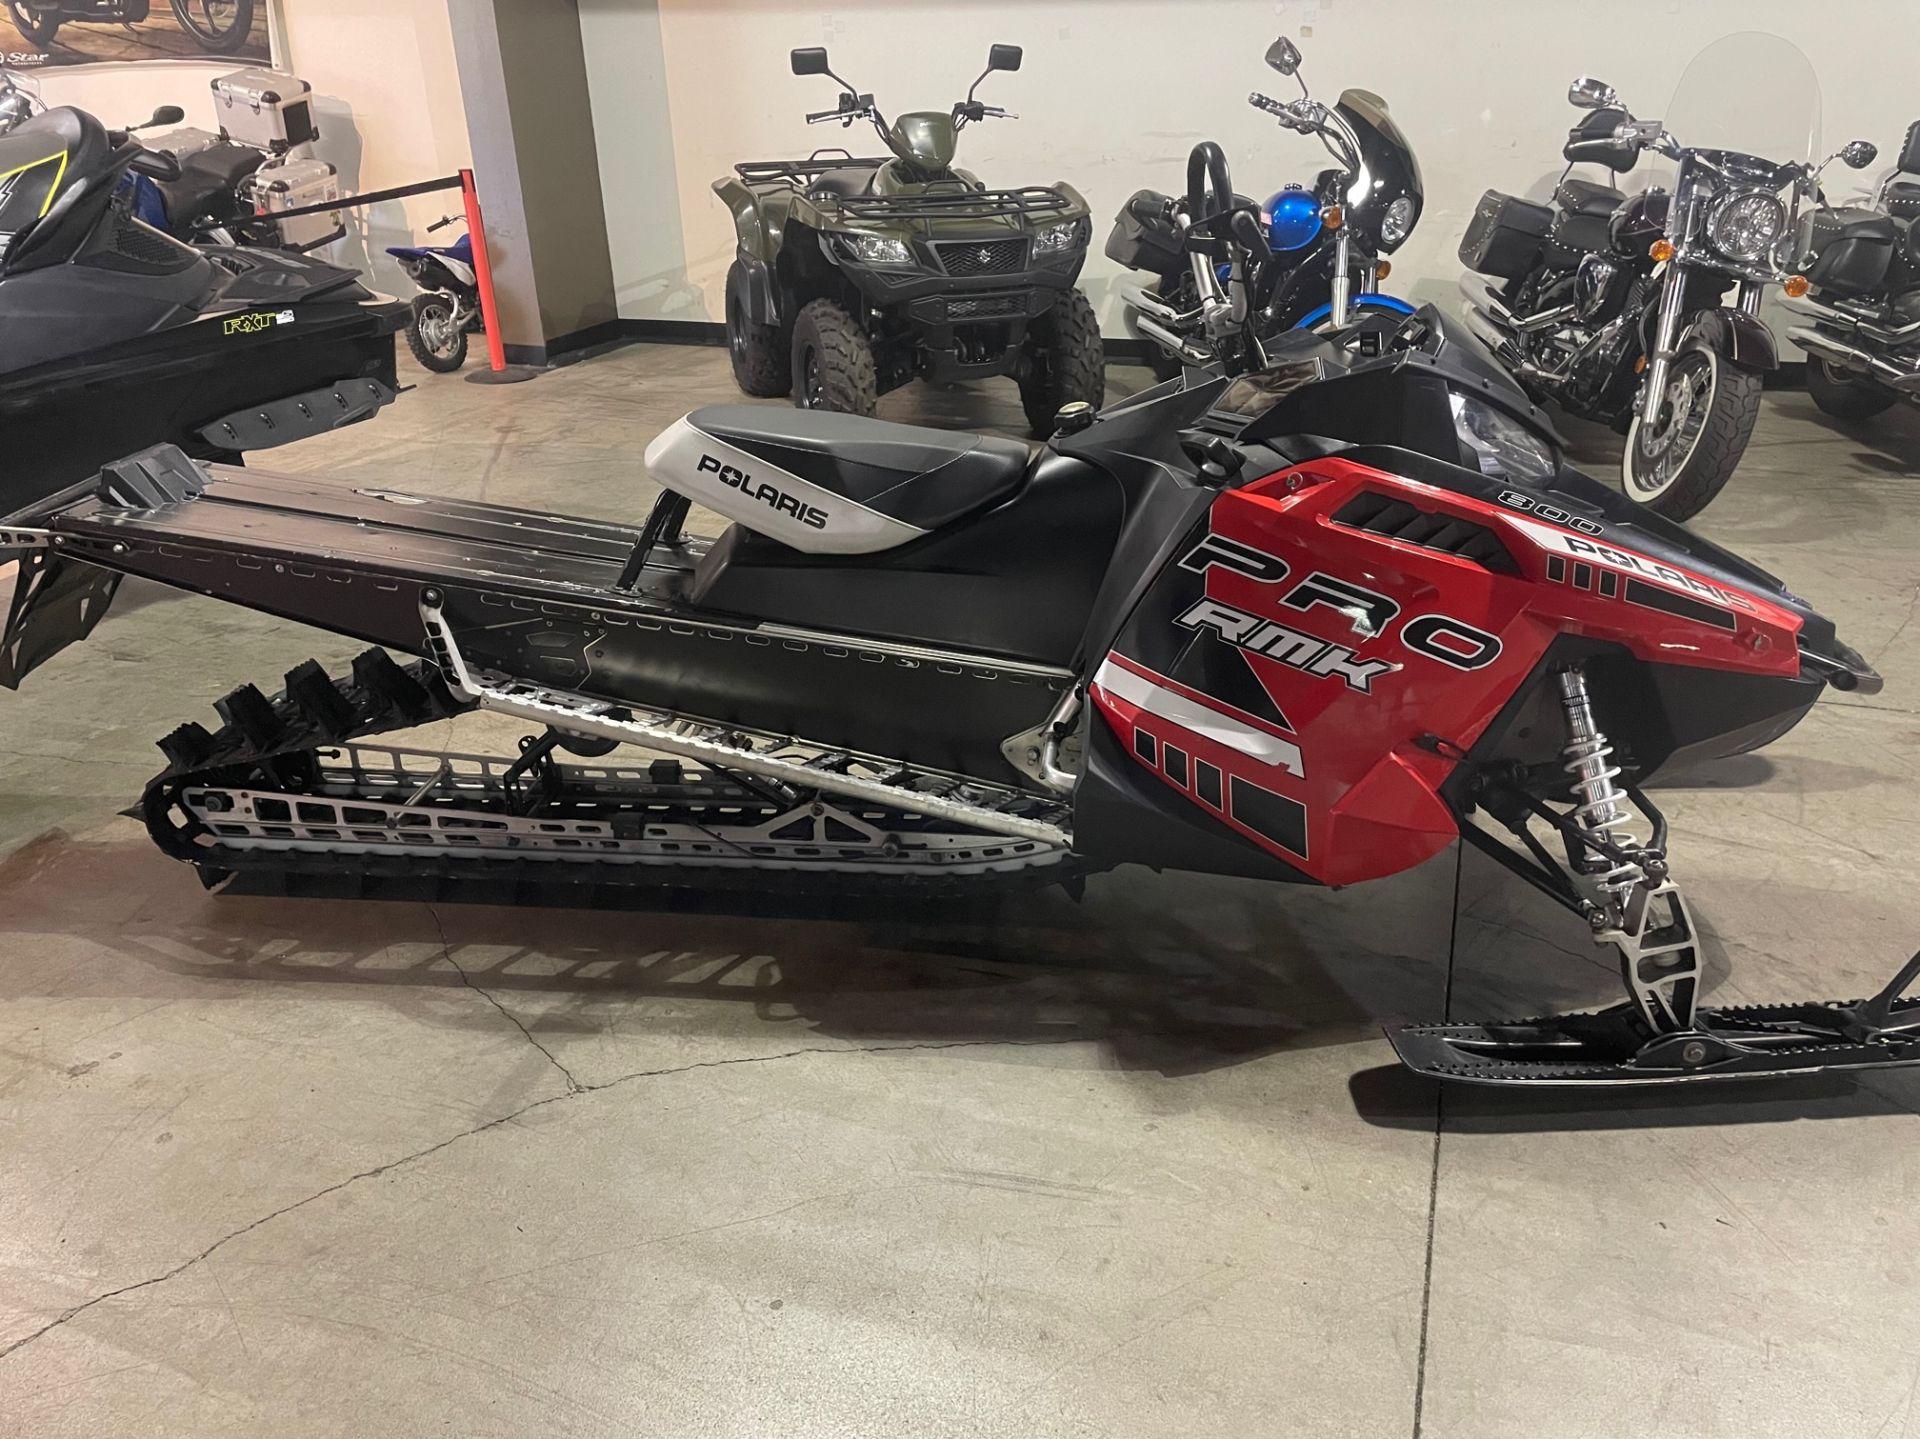 Used 2014 Polaris 800 PRO RMK 163 Ride Motorsports is located in